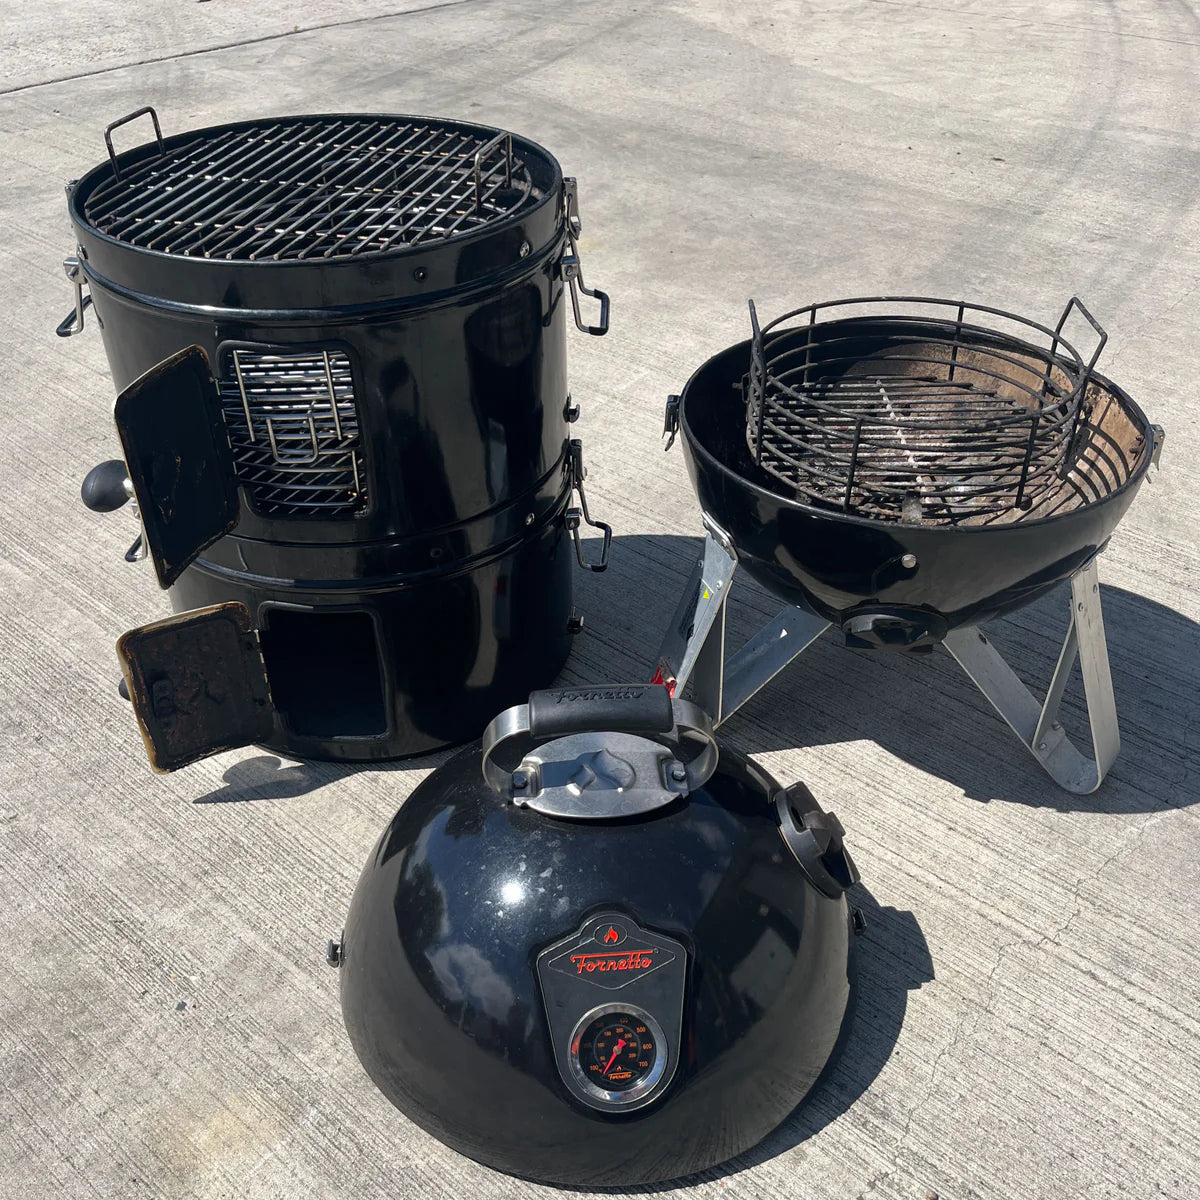 Trade in your old BBQ, for the Kamado you want